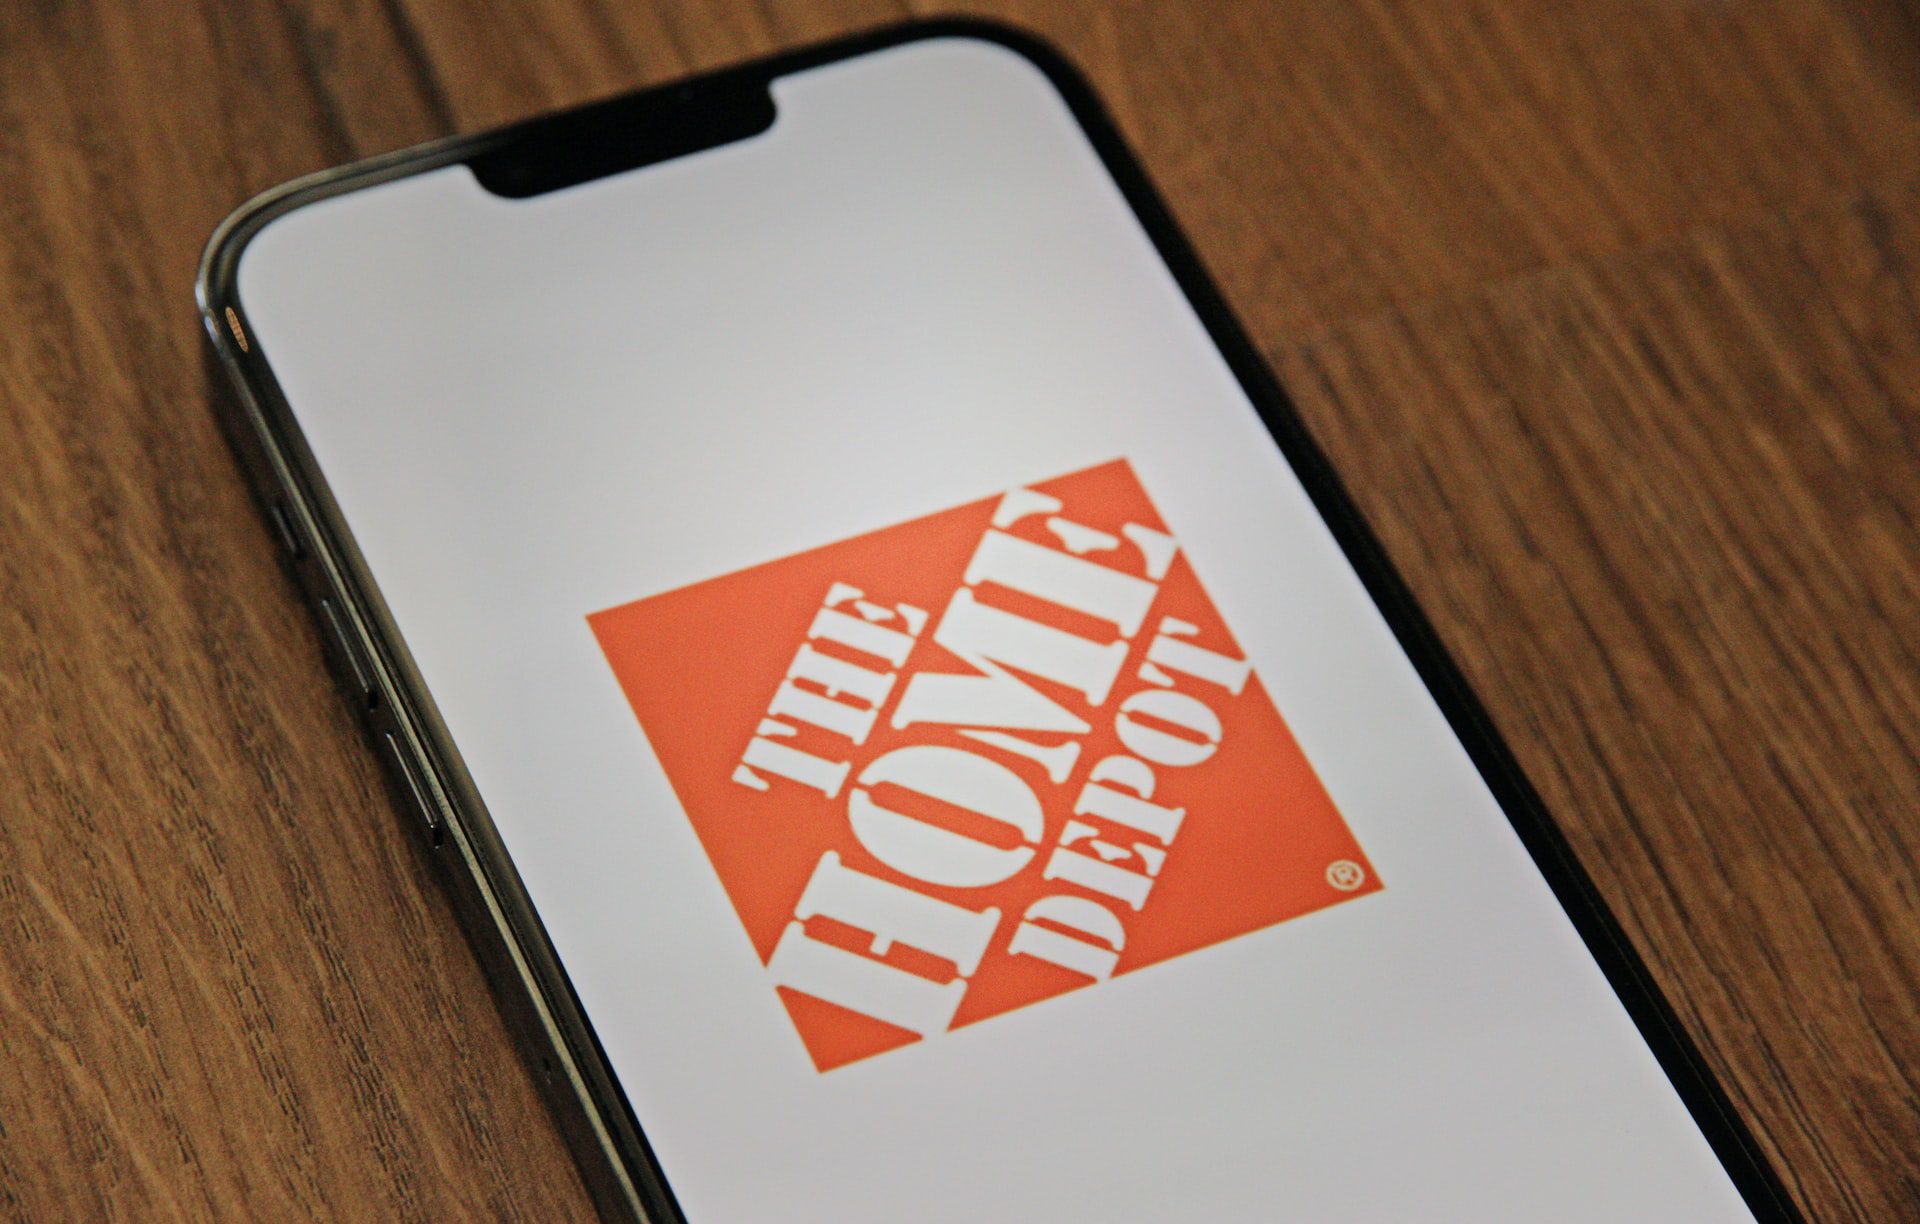 Virtual Home Improvement: The Home Depot Files 24 Web3 Trademarks for its Name, Logo, and Brands